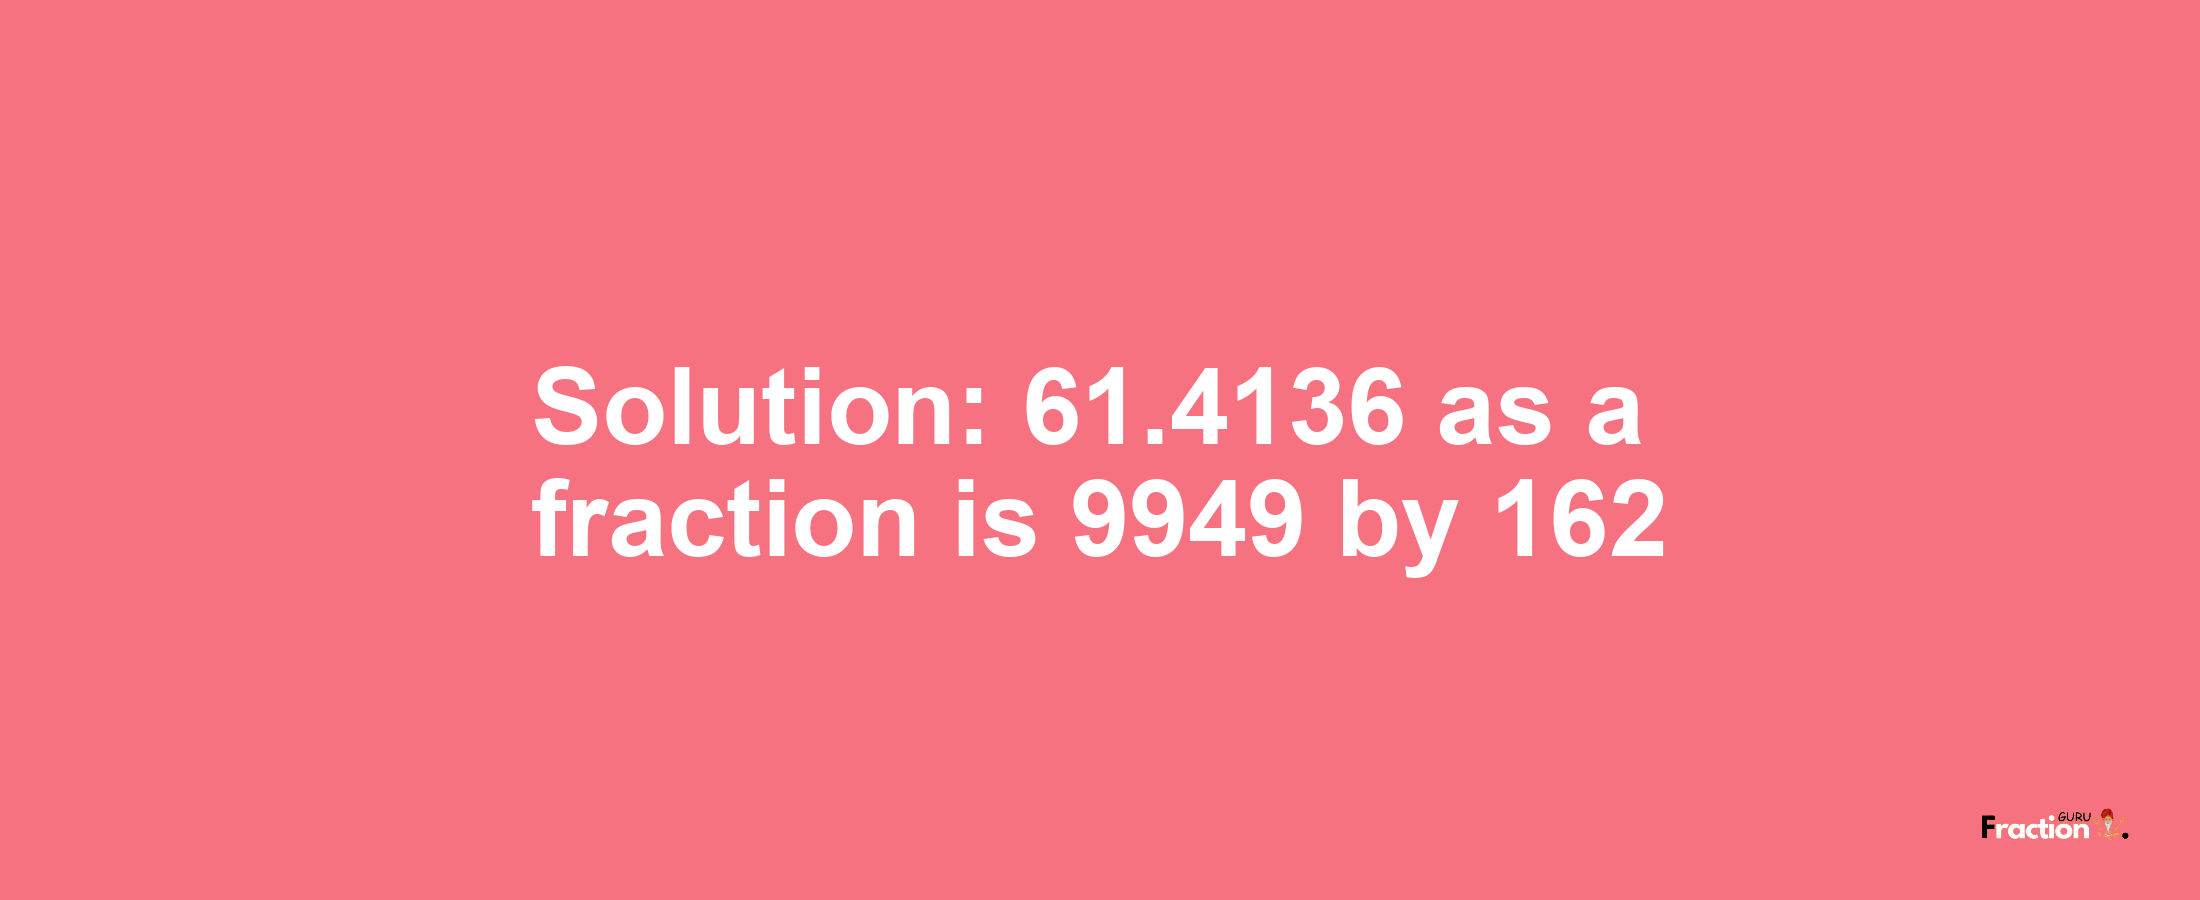 Solution:61.4136 as a fraction is 9949/162